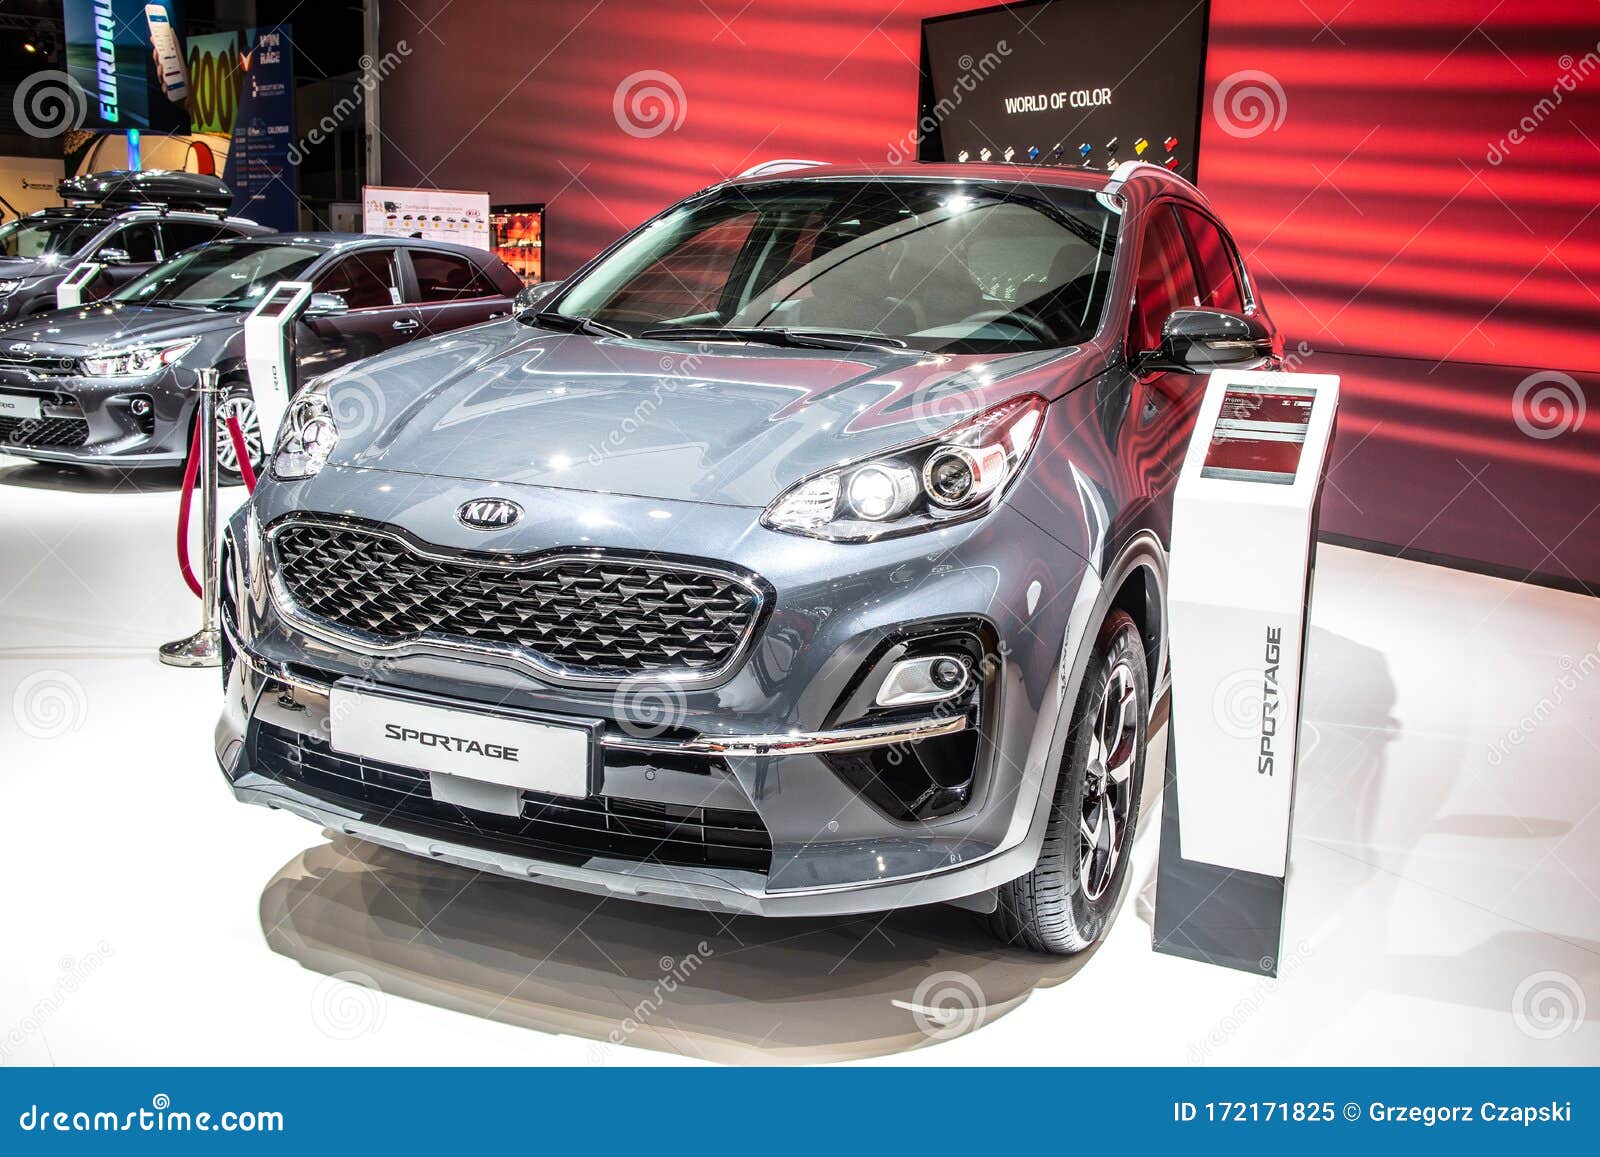 Kia at Brussels Motor Show, Fourth Generation, QL, Compact SUV Built by Kia Motor Corporation Editorial Image - Image of automotive, belgium: 172171825